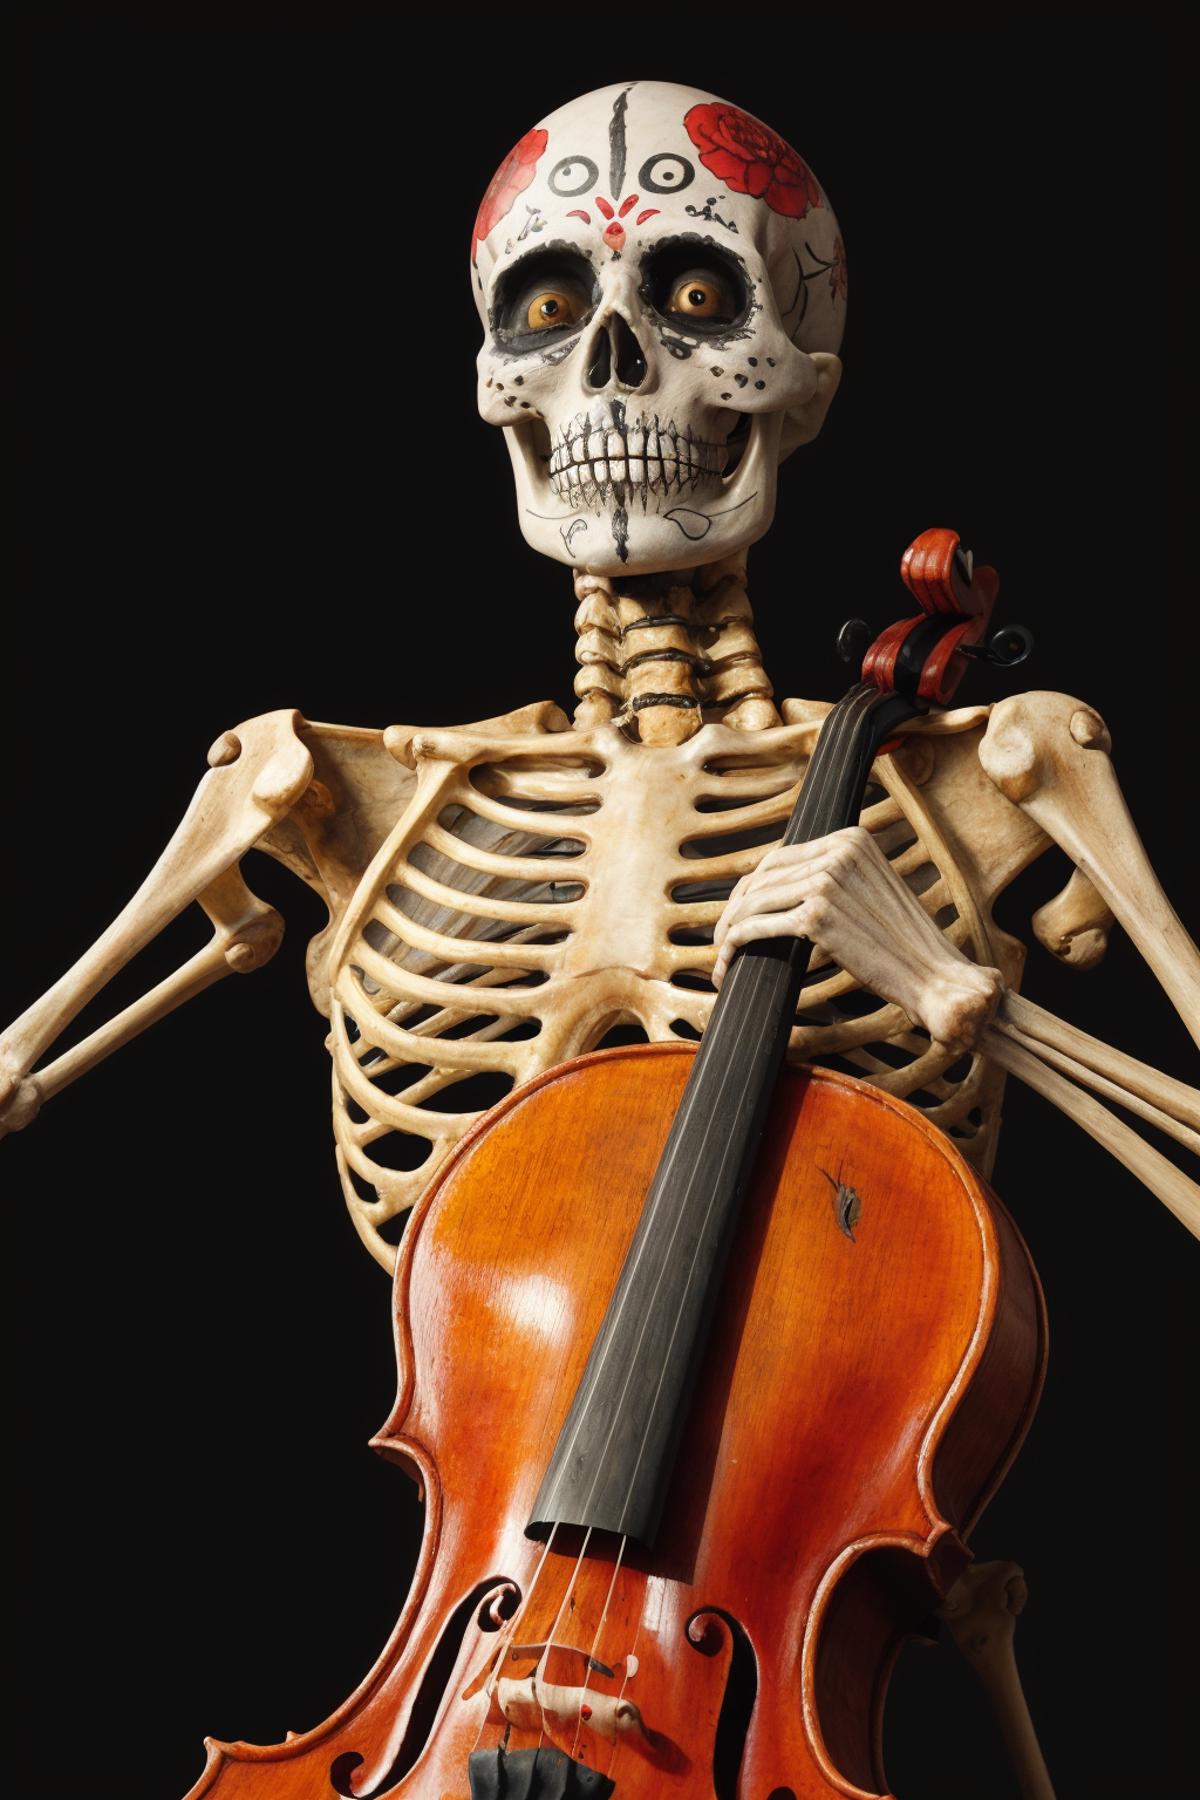 A Skeleton Playing a Violin